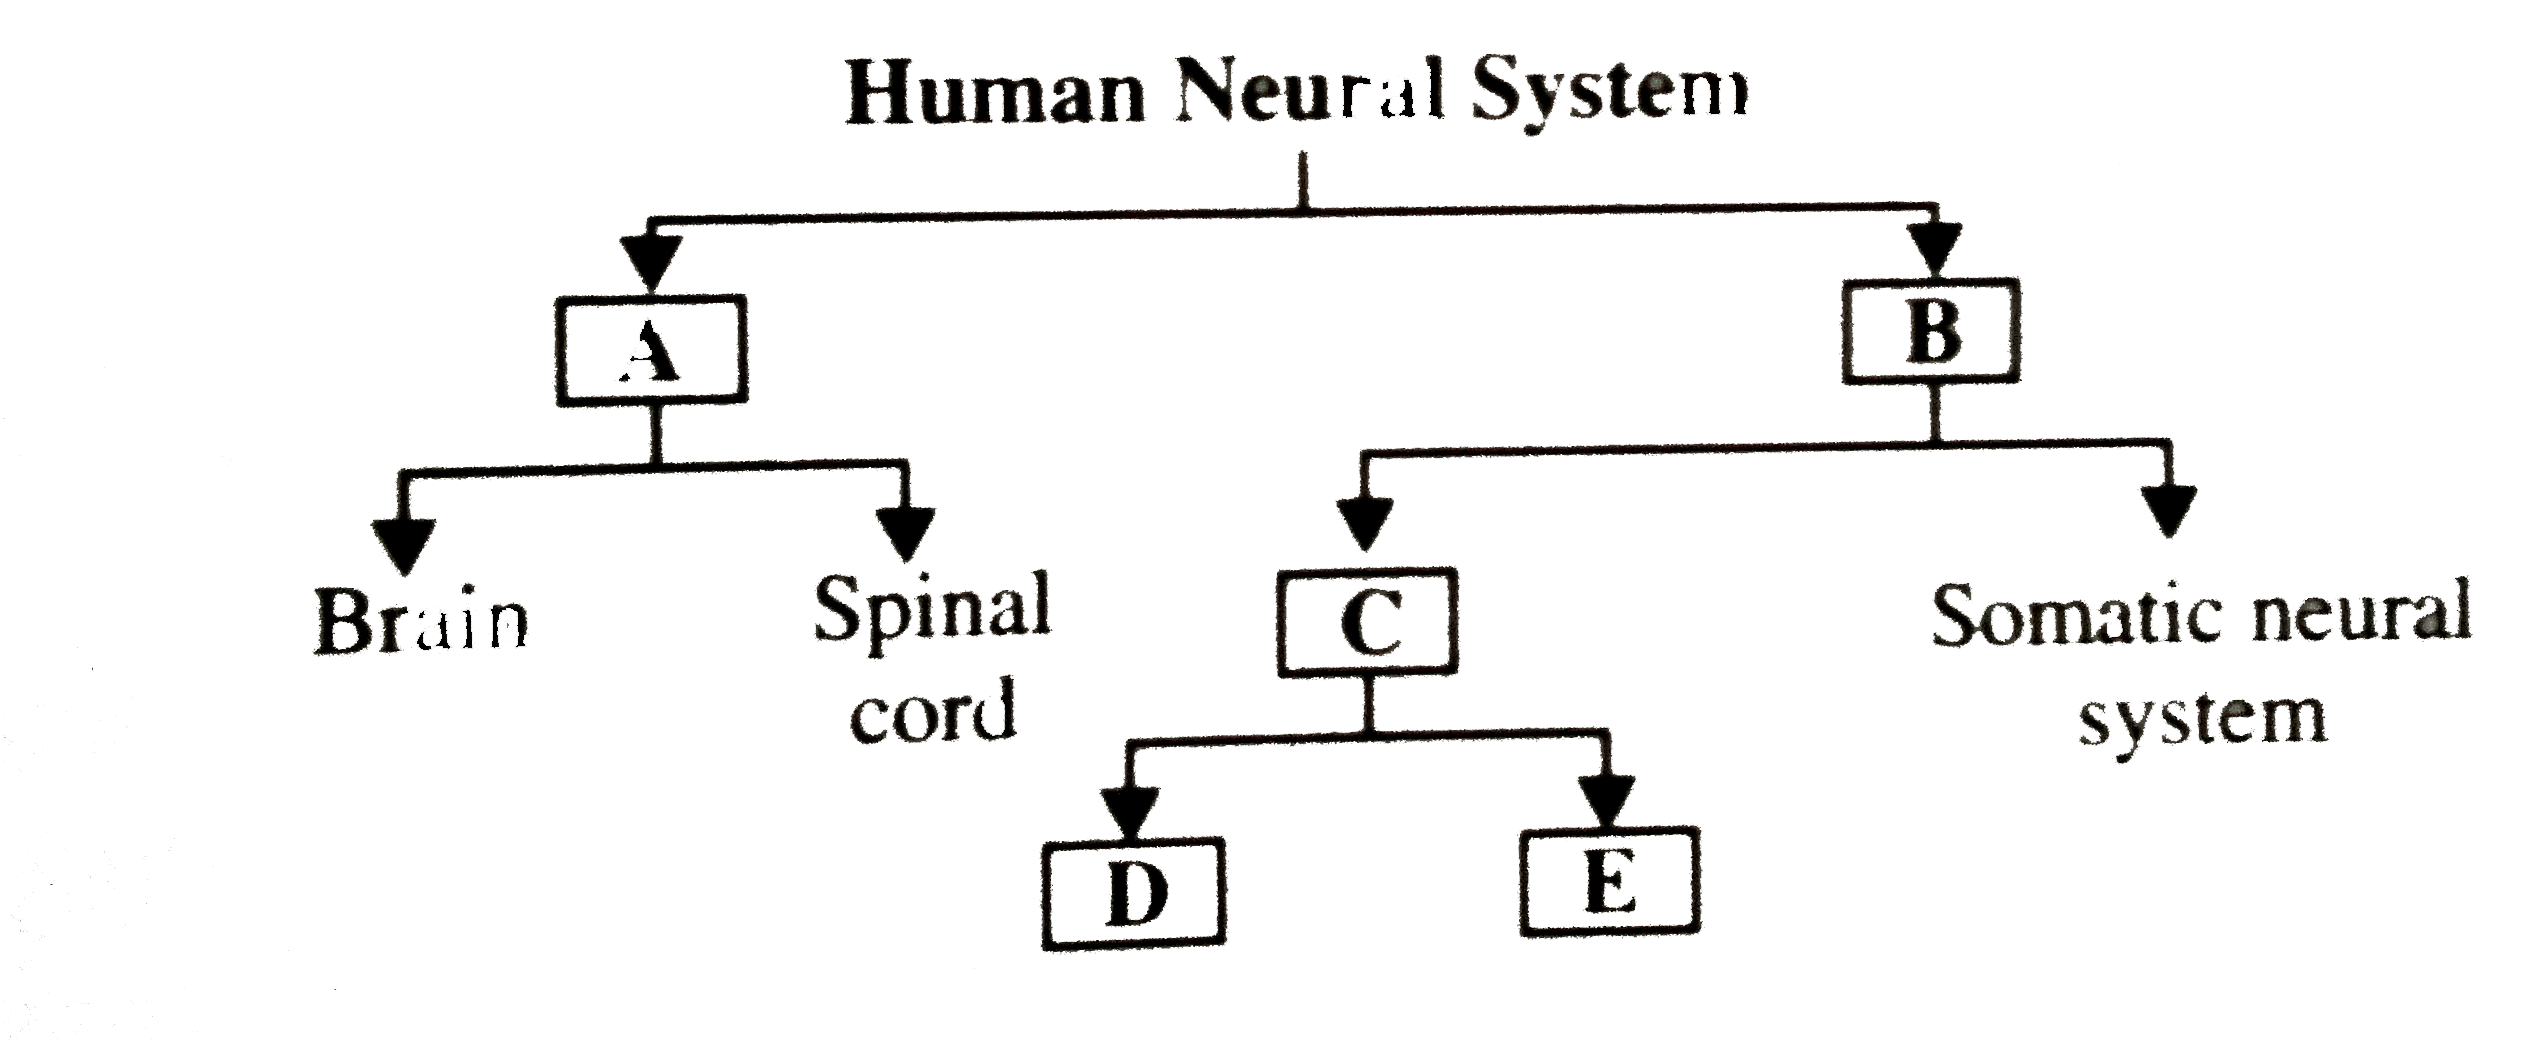 The flow chart given here shows functional organisation of the human neural system.Indentify A to E and select the correct options.